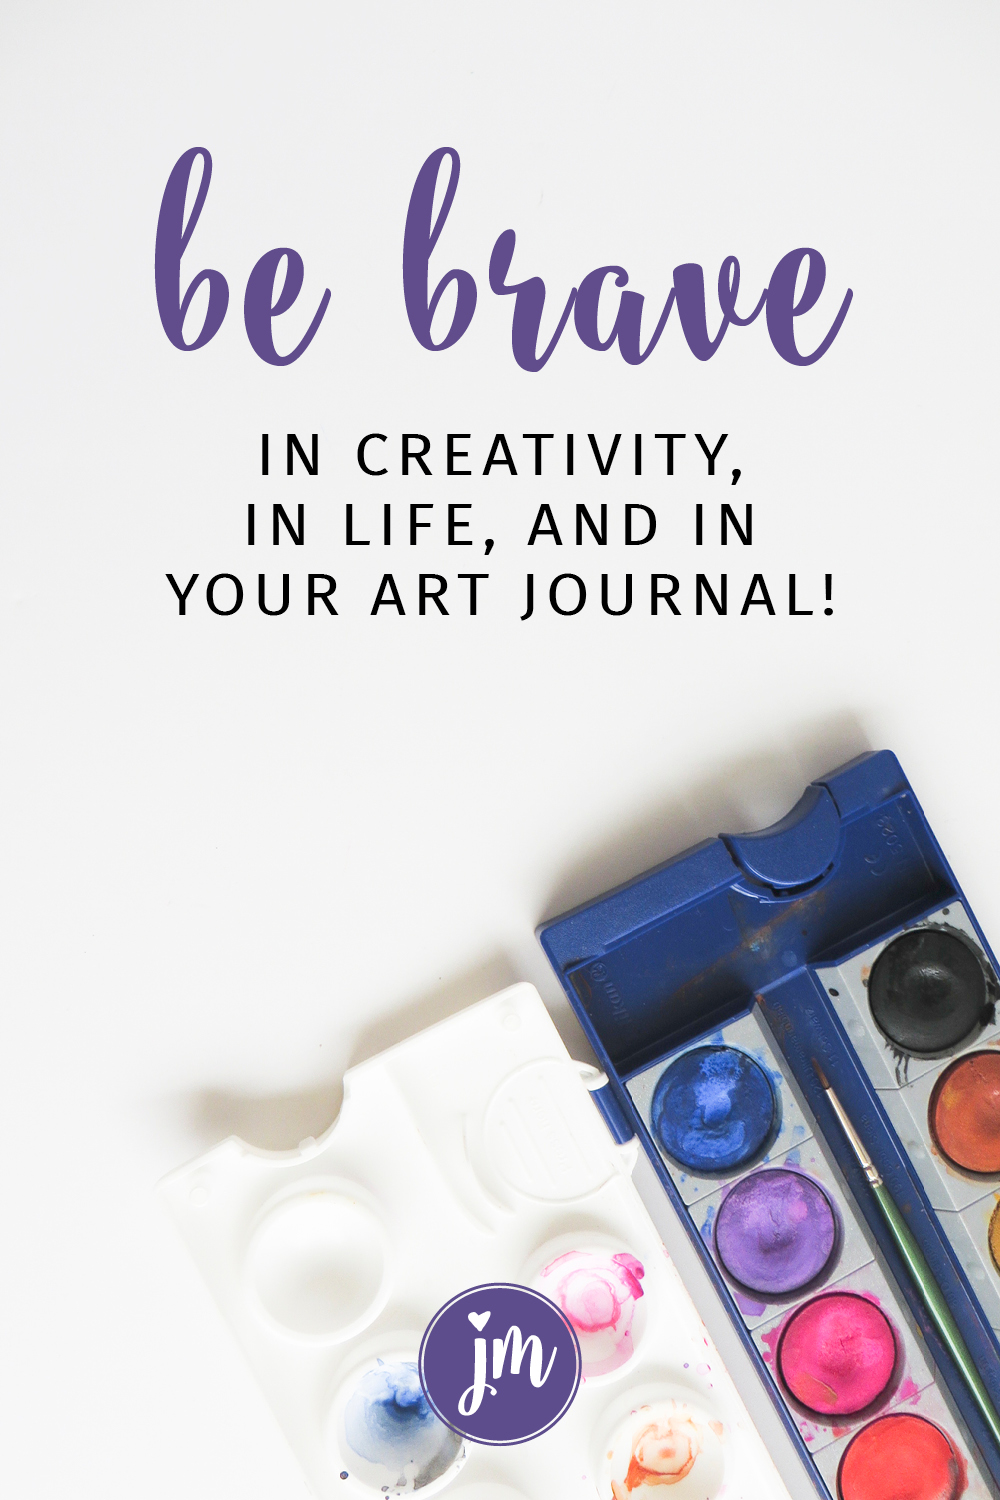 So good. It's hard to step out of my comfort zone when I'm creating, even if it's kind of silly to admit. I need to remember that all of those little steps matter. And they change how I see my life in general too! #artjournaling #bravegirl